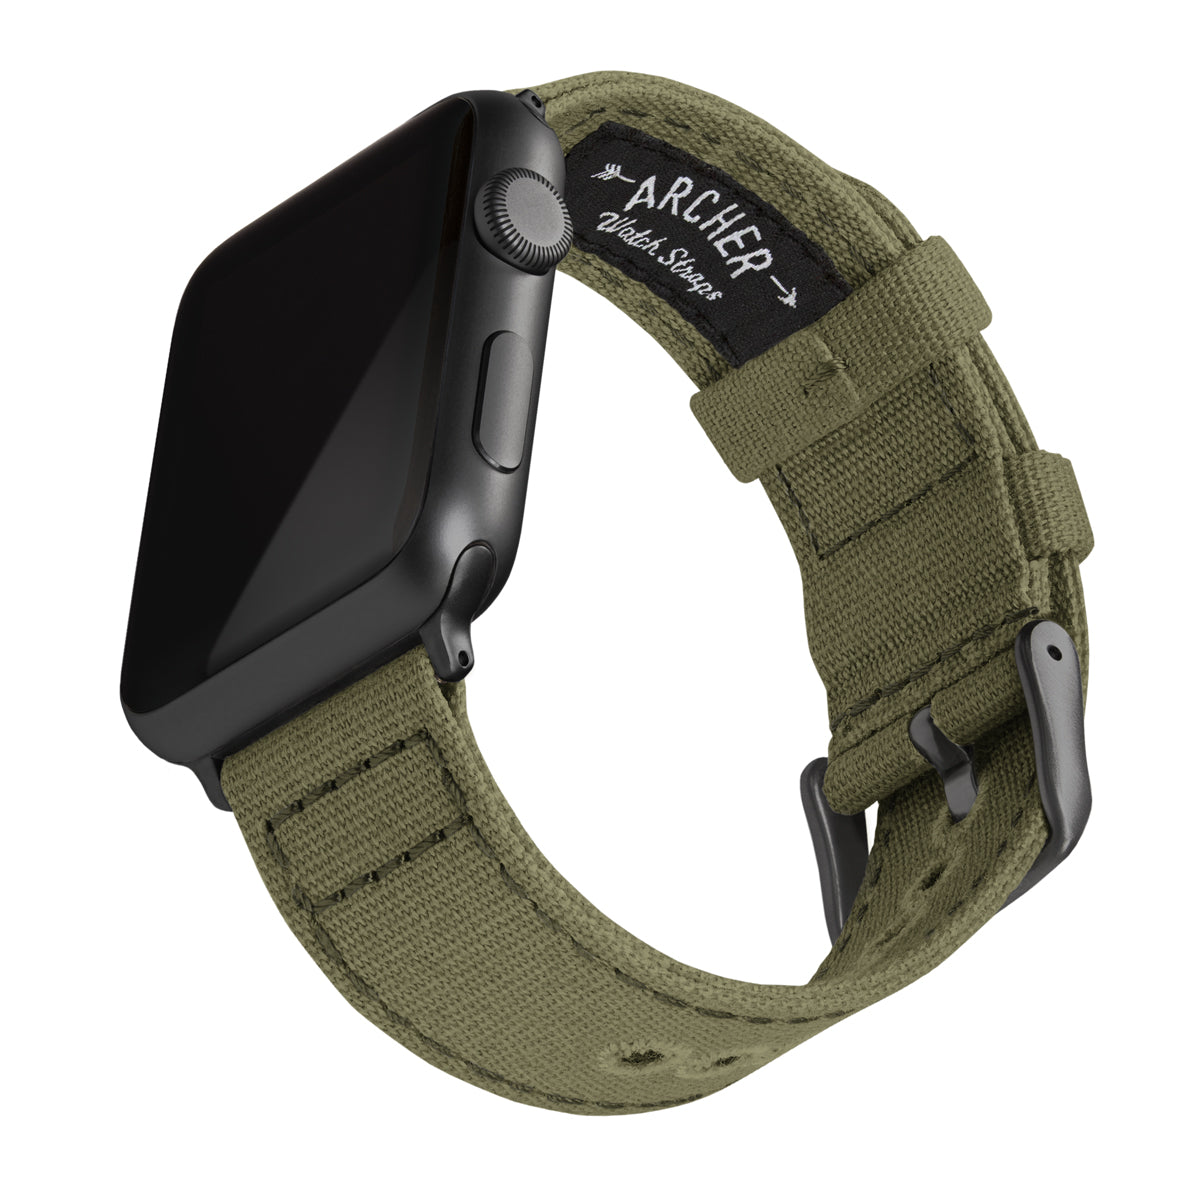 Archer Watch Straps - Premium Nylon Replacement Bands for Apple Watch